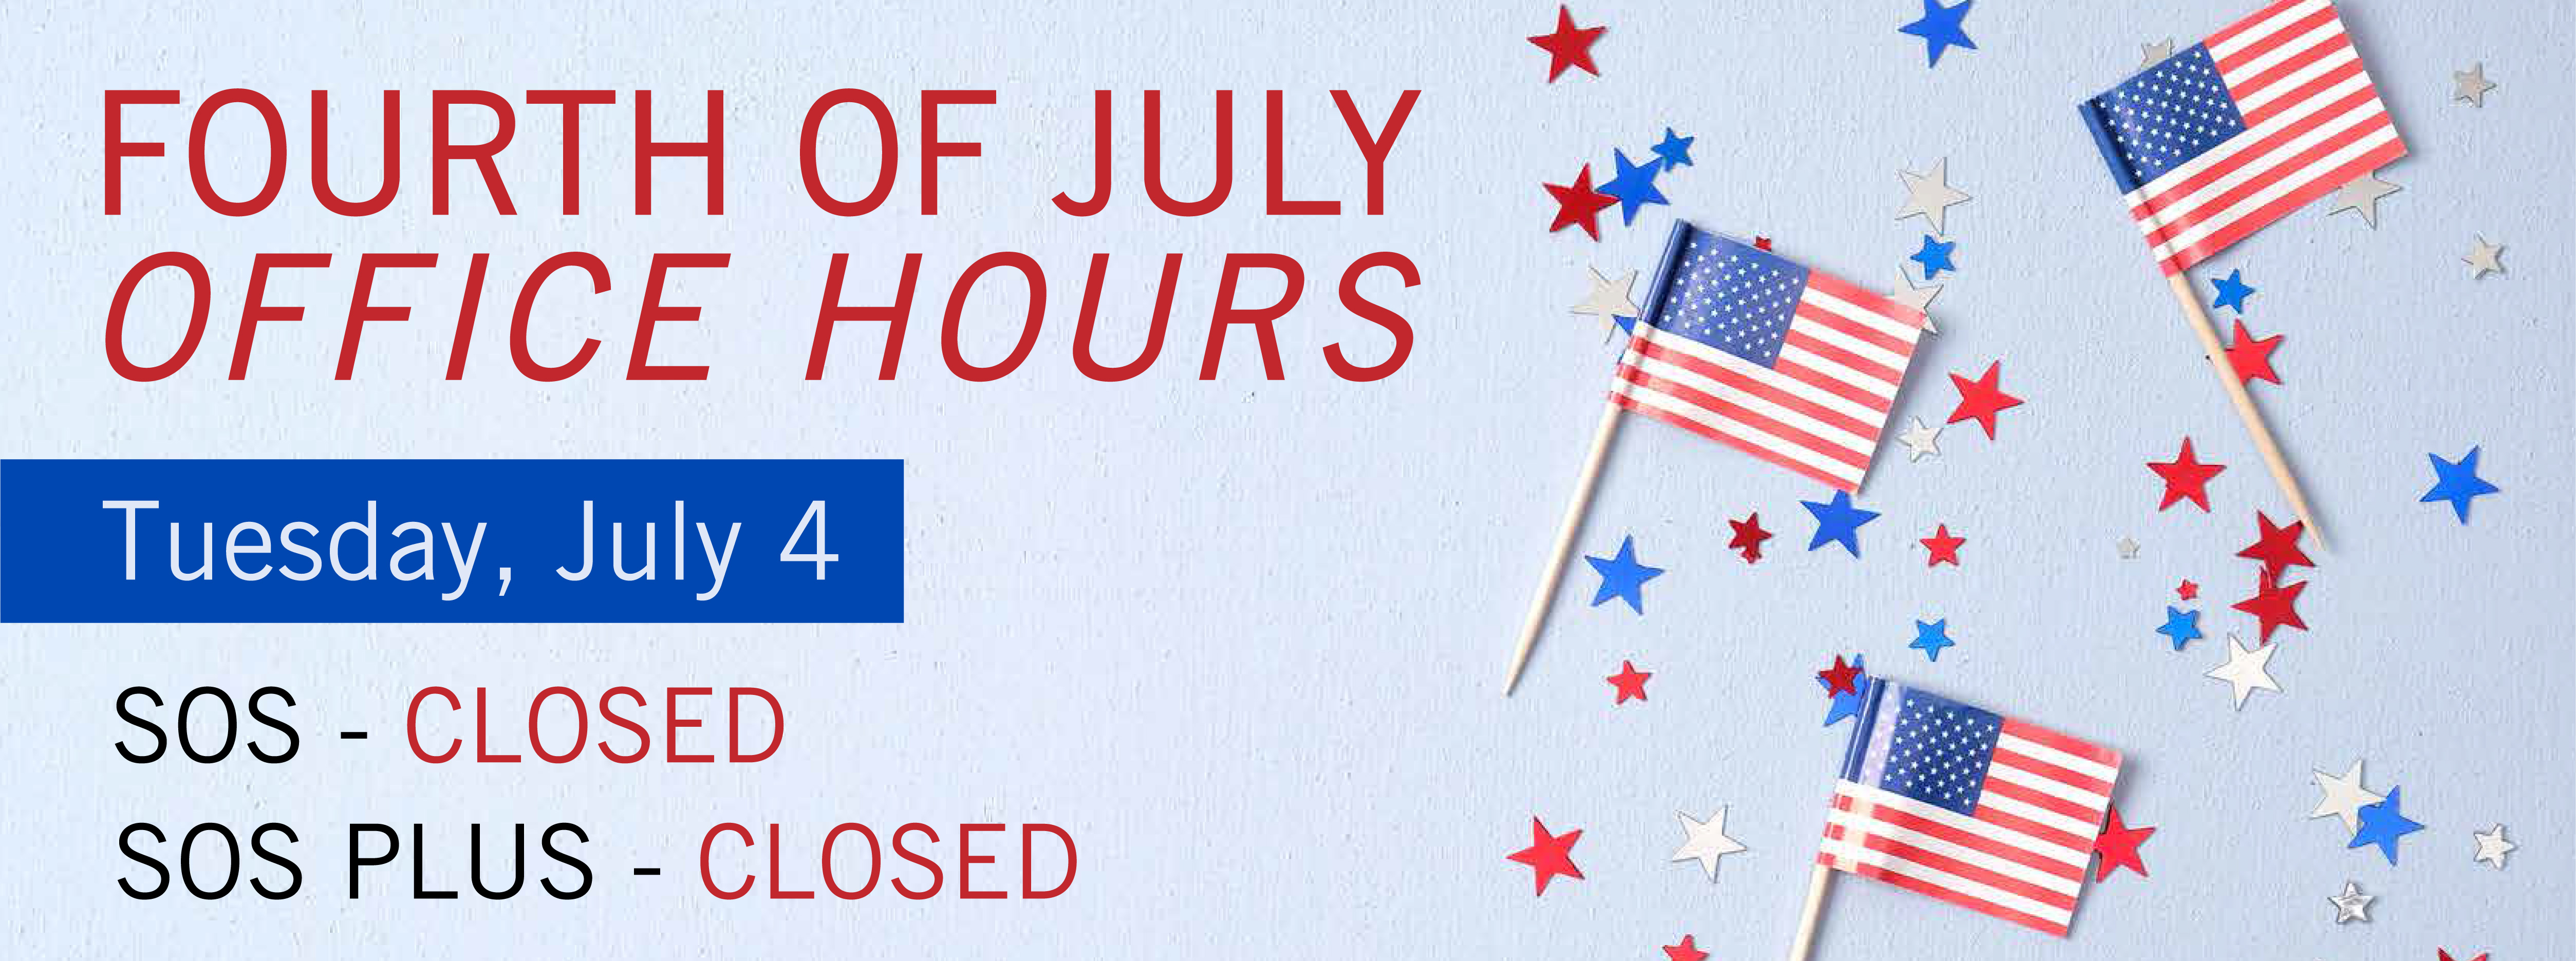 SOS and SOS PLUS will be Closed on the Fourth of July